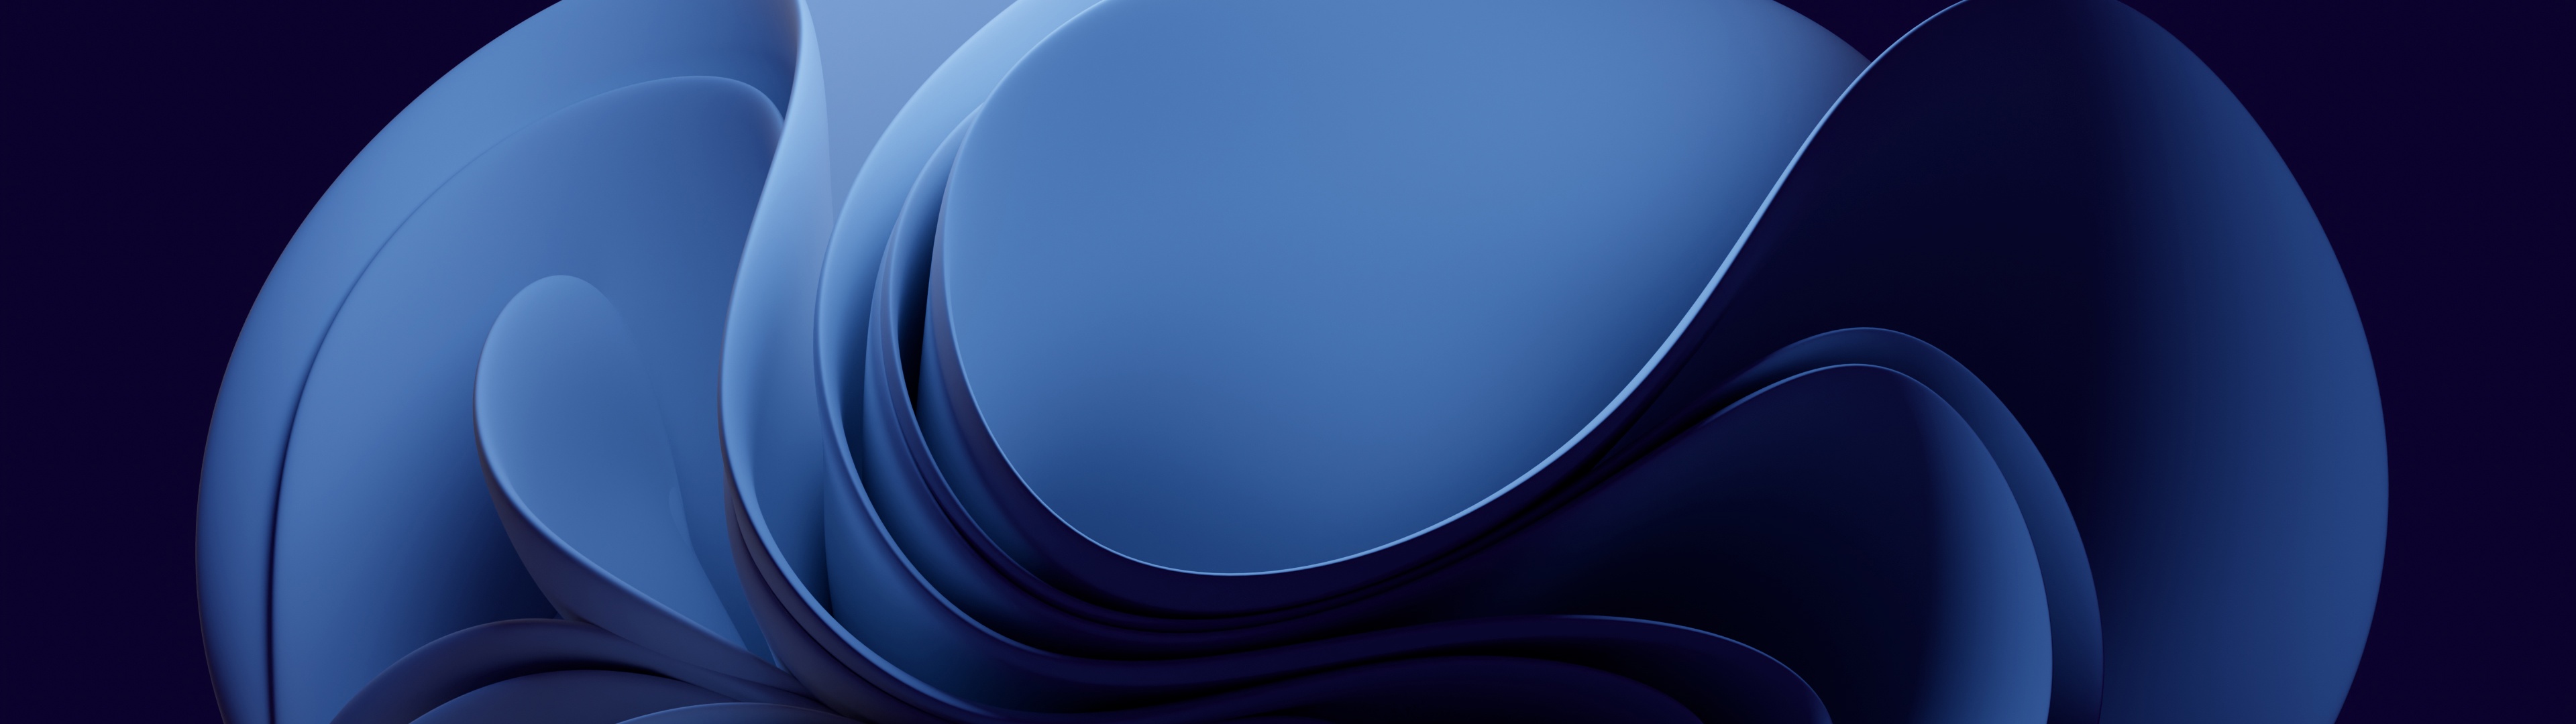 Blue background Wallpaper 4K, Abstract background, Abstract, #8846